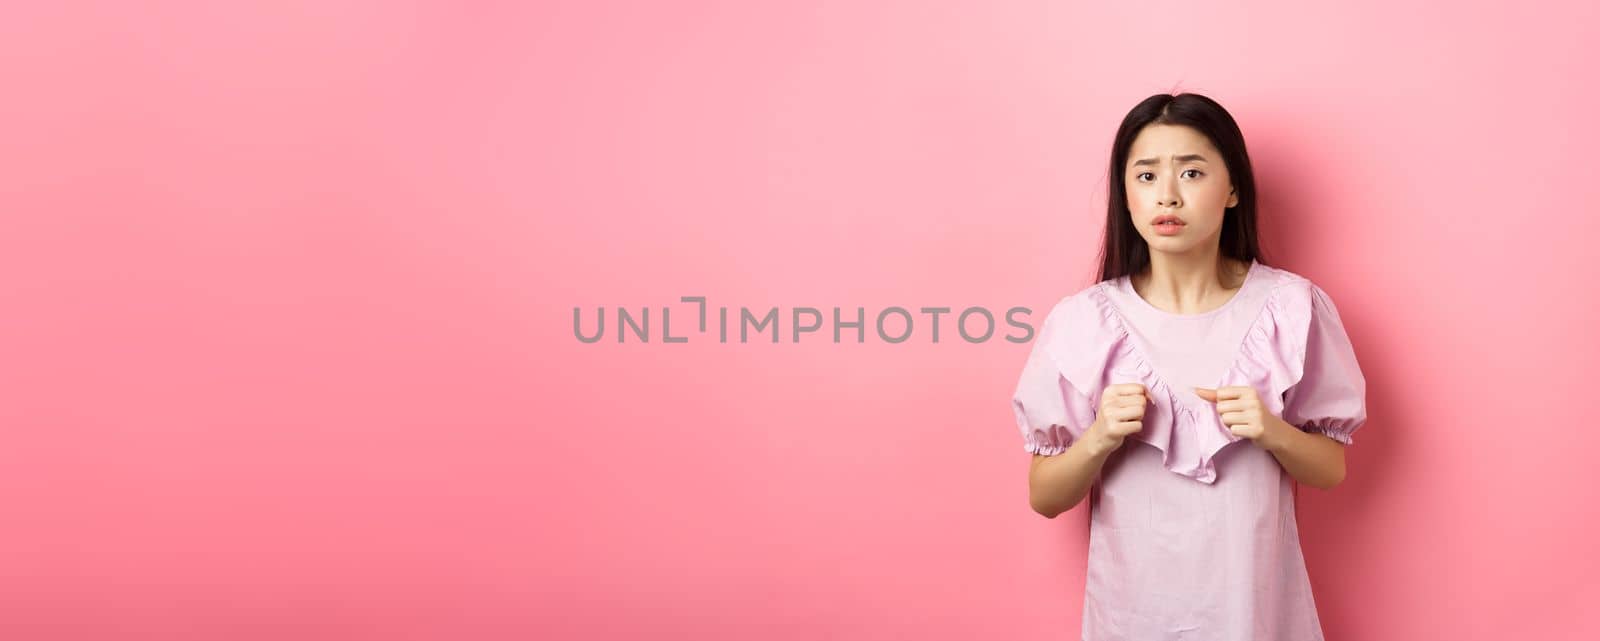 Scared teen asian girl clench fists and looking alarmed at camera, frightened with something scary, standing on pink background.